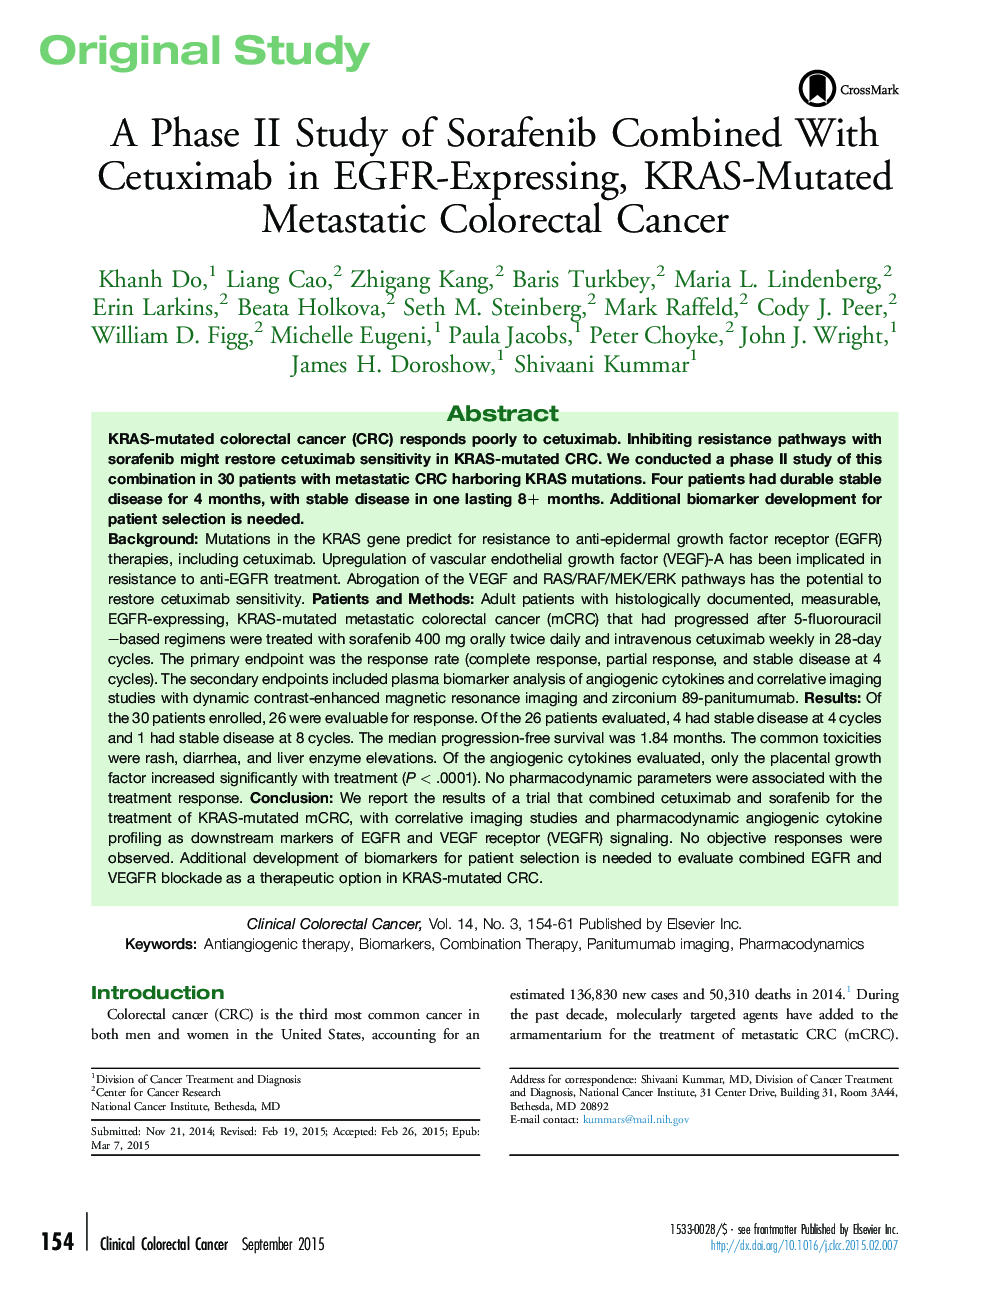 A Phase II Study of Sorafenib Combined With Cetuximab in EGFR-Expressing, KRAS-Mutated Metastatic Colorectal Cancer